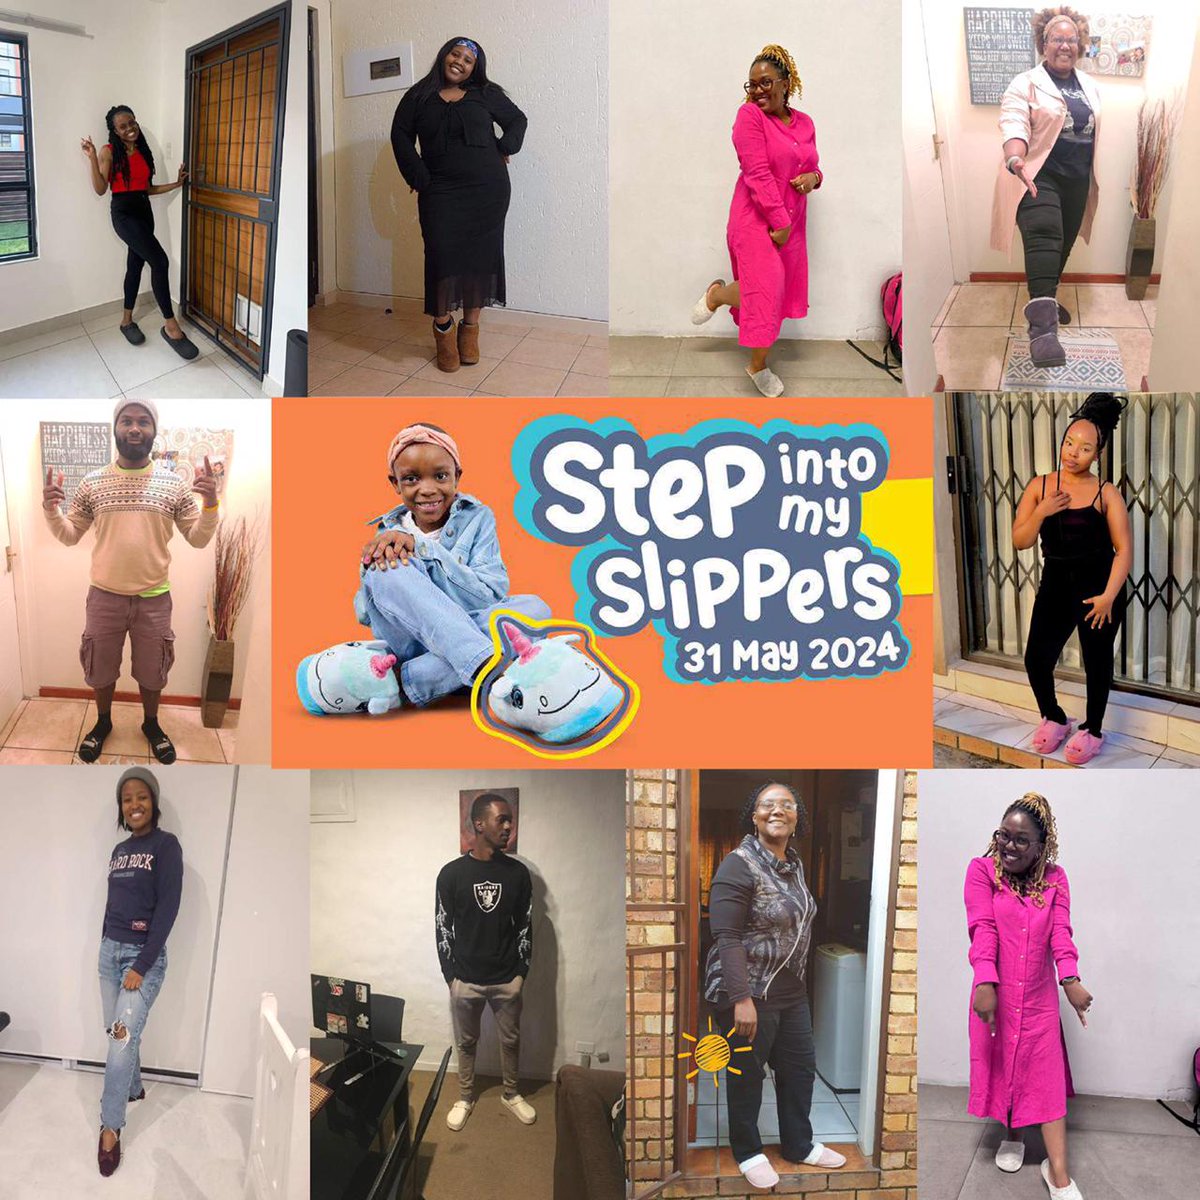 The GaniTech Team Showed up! Thank you for supporting Slipper Day, Reach For A Dream's biggest fundraiser to give Hope to Children with Life-threatening Illnesses #slipperday2024 #stepintomyslippers #PSCC